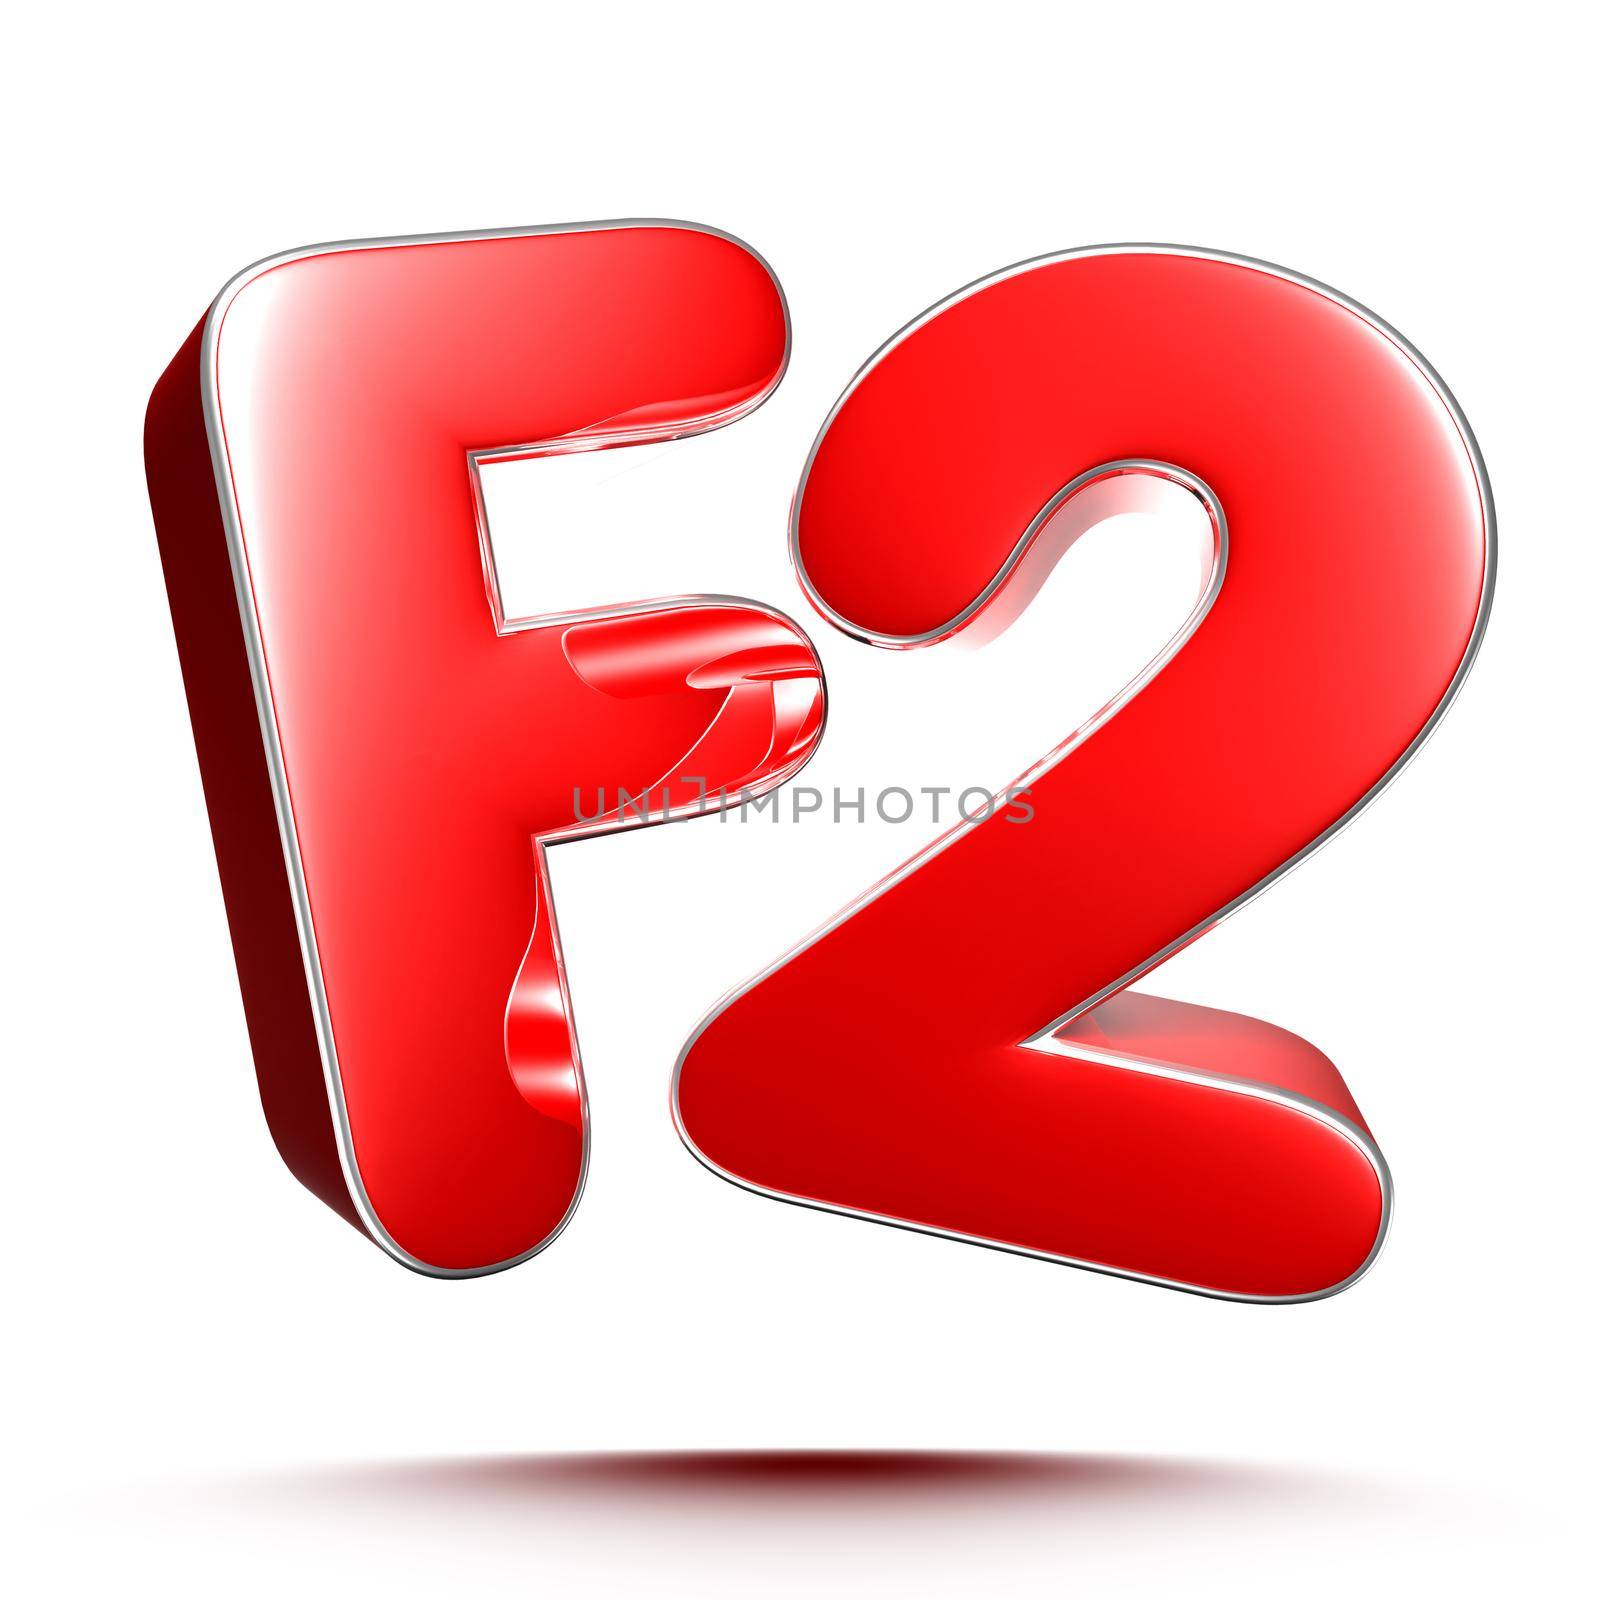 F2 red 3D illustration on white background with clipping path. by thitimontoyai